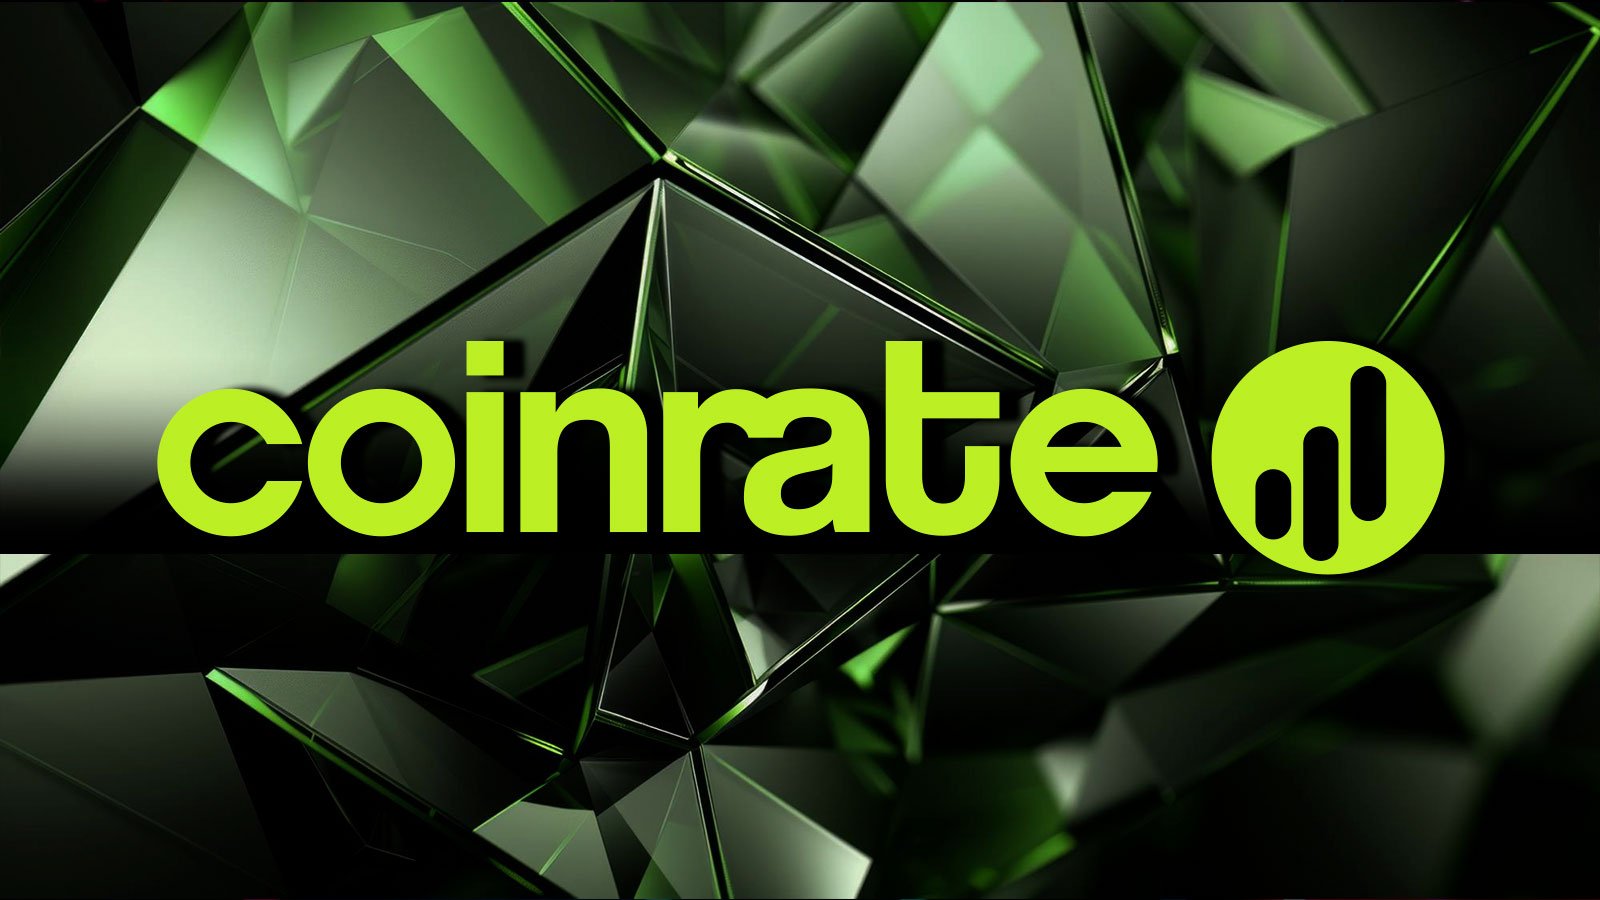 Coinrate.pro's Exclusive Market-Making Systems Overcome Low Market Cap and Trading Volume Issues